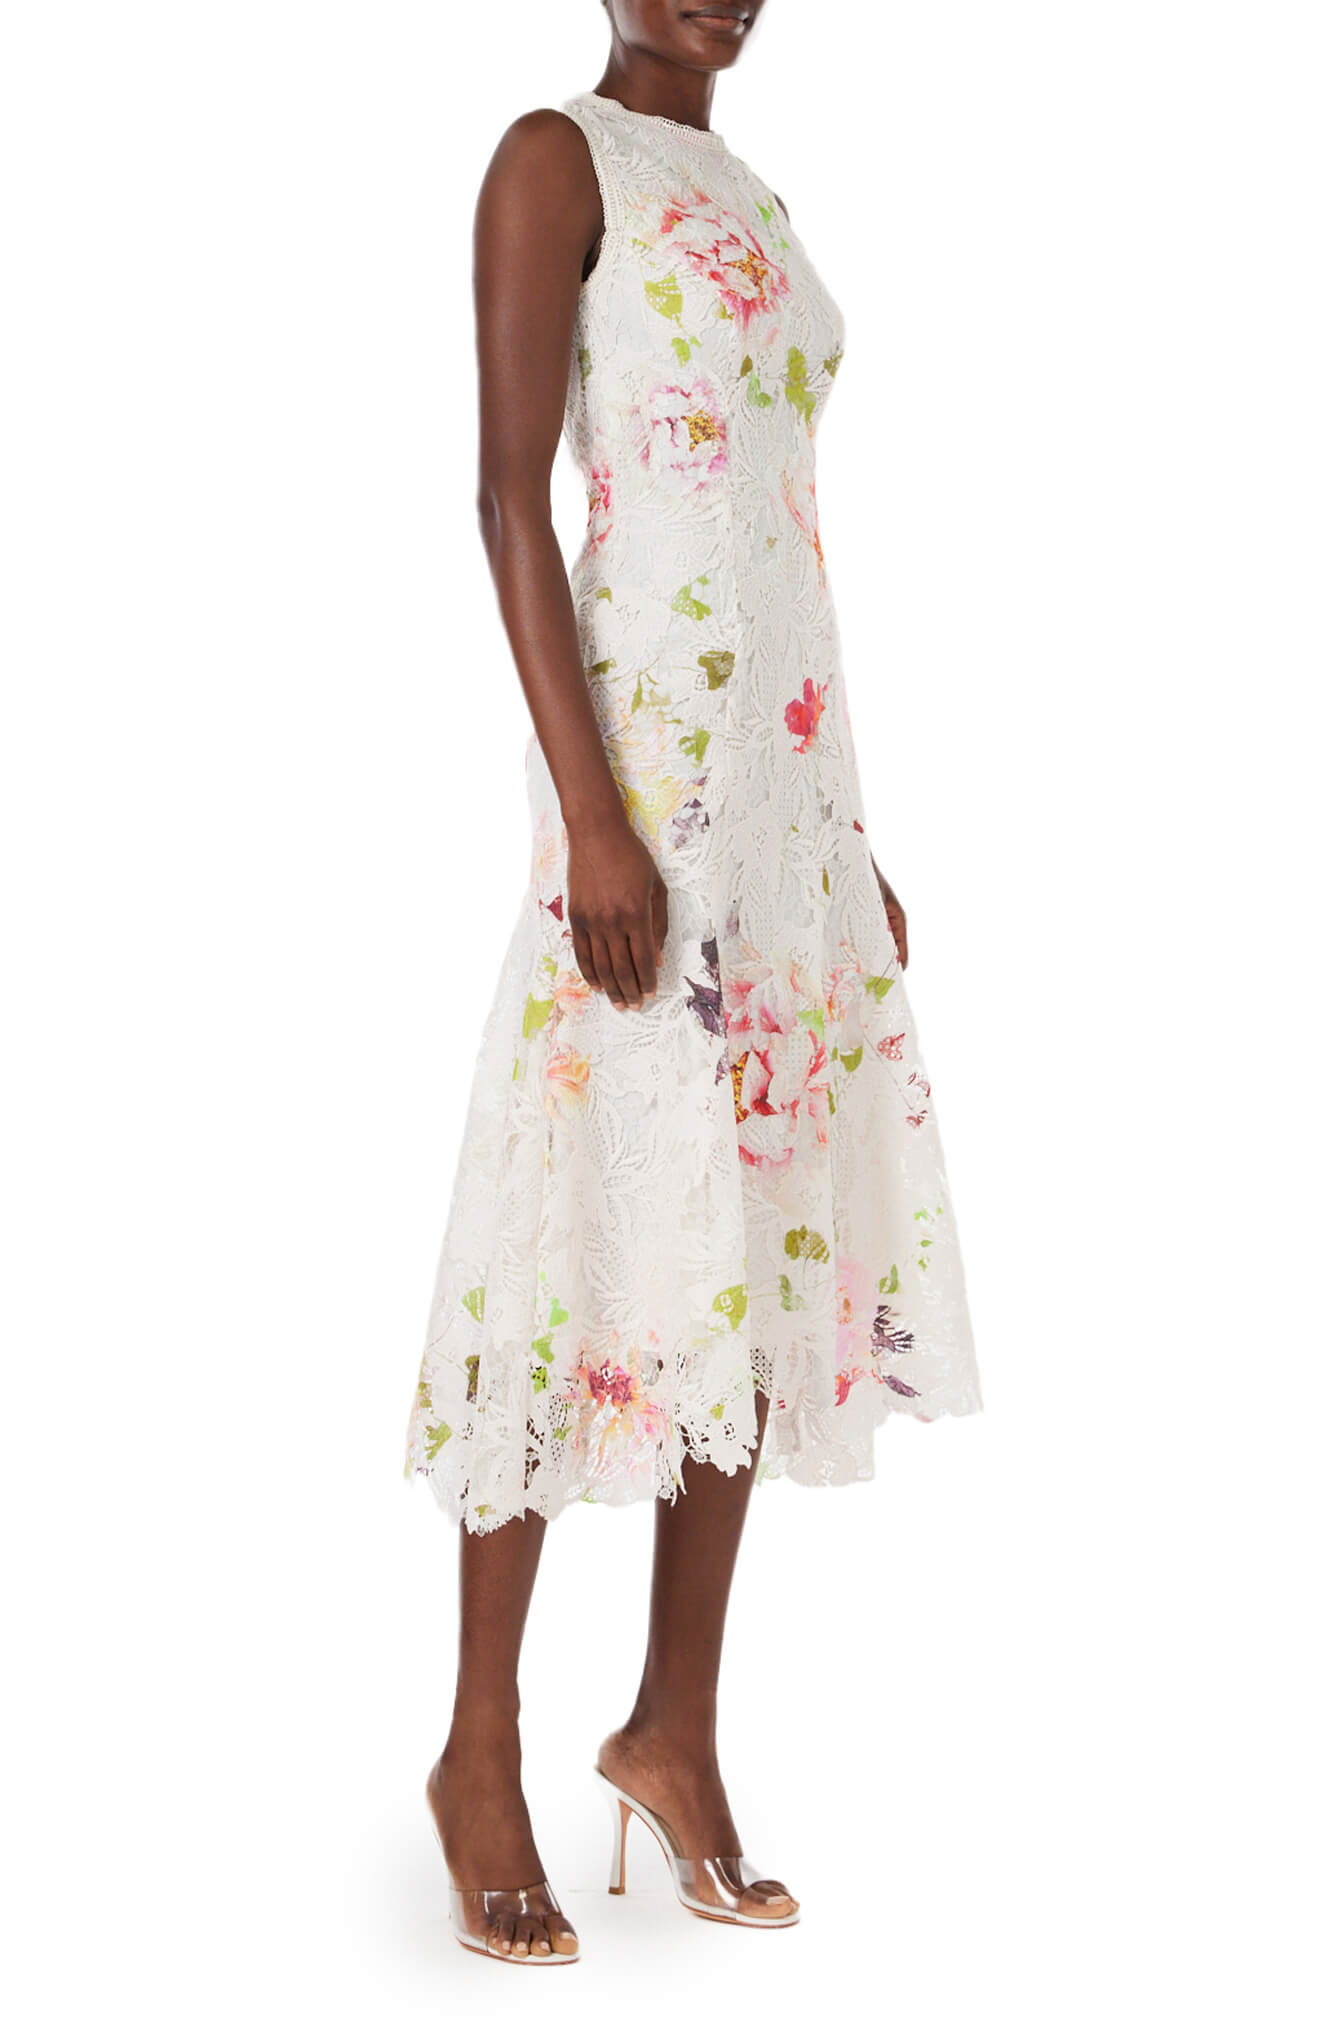 Monique Lhuillier midi dress in silk white lace with floral print.